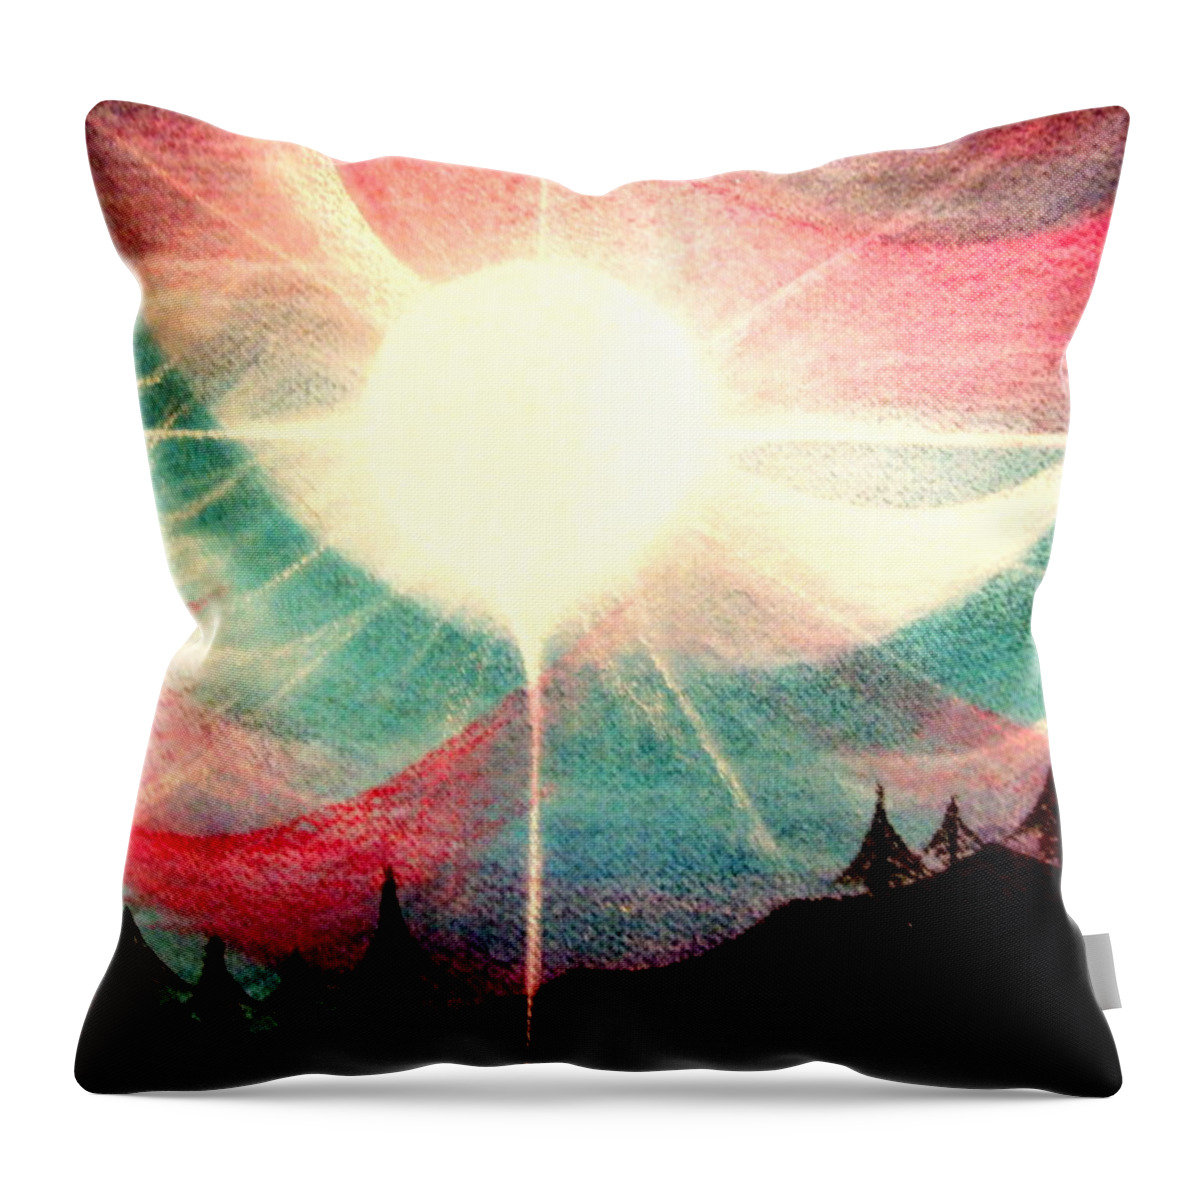 Sunrise.landscape Throw Pillow featuring the painting Rising Sun by Kumiko Mayer